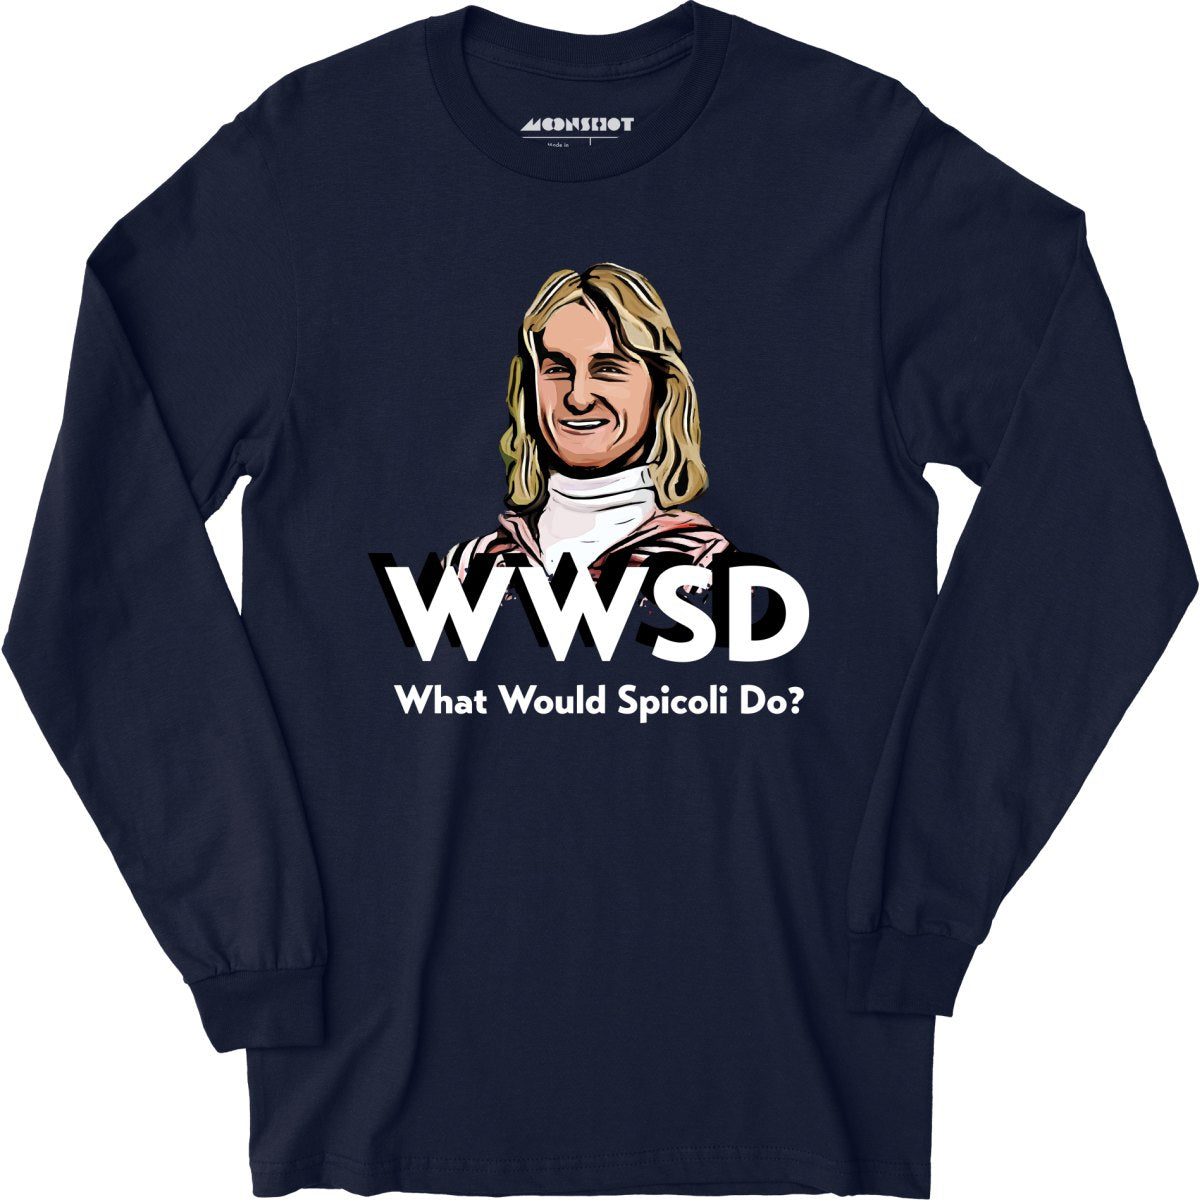 What Would Spicoli Do? - Long Sleeve T-Shirt